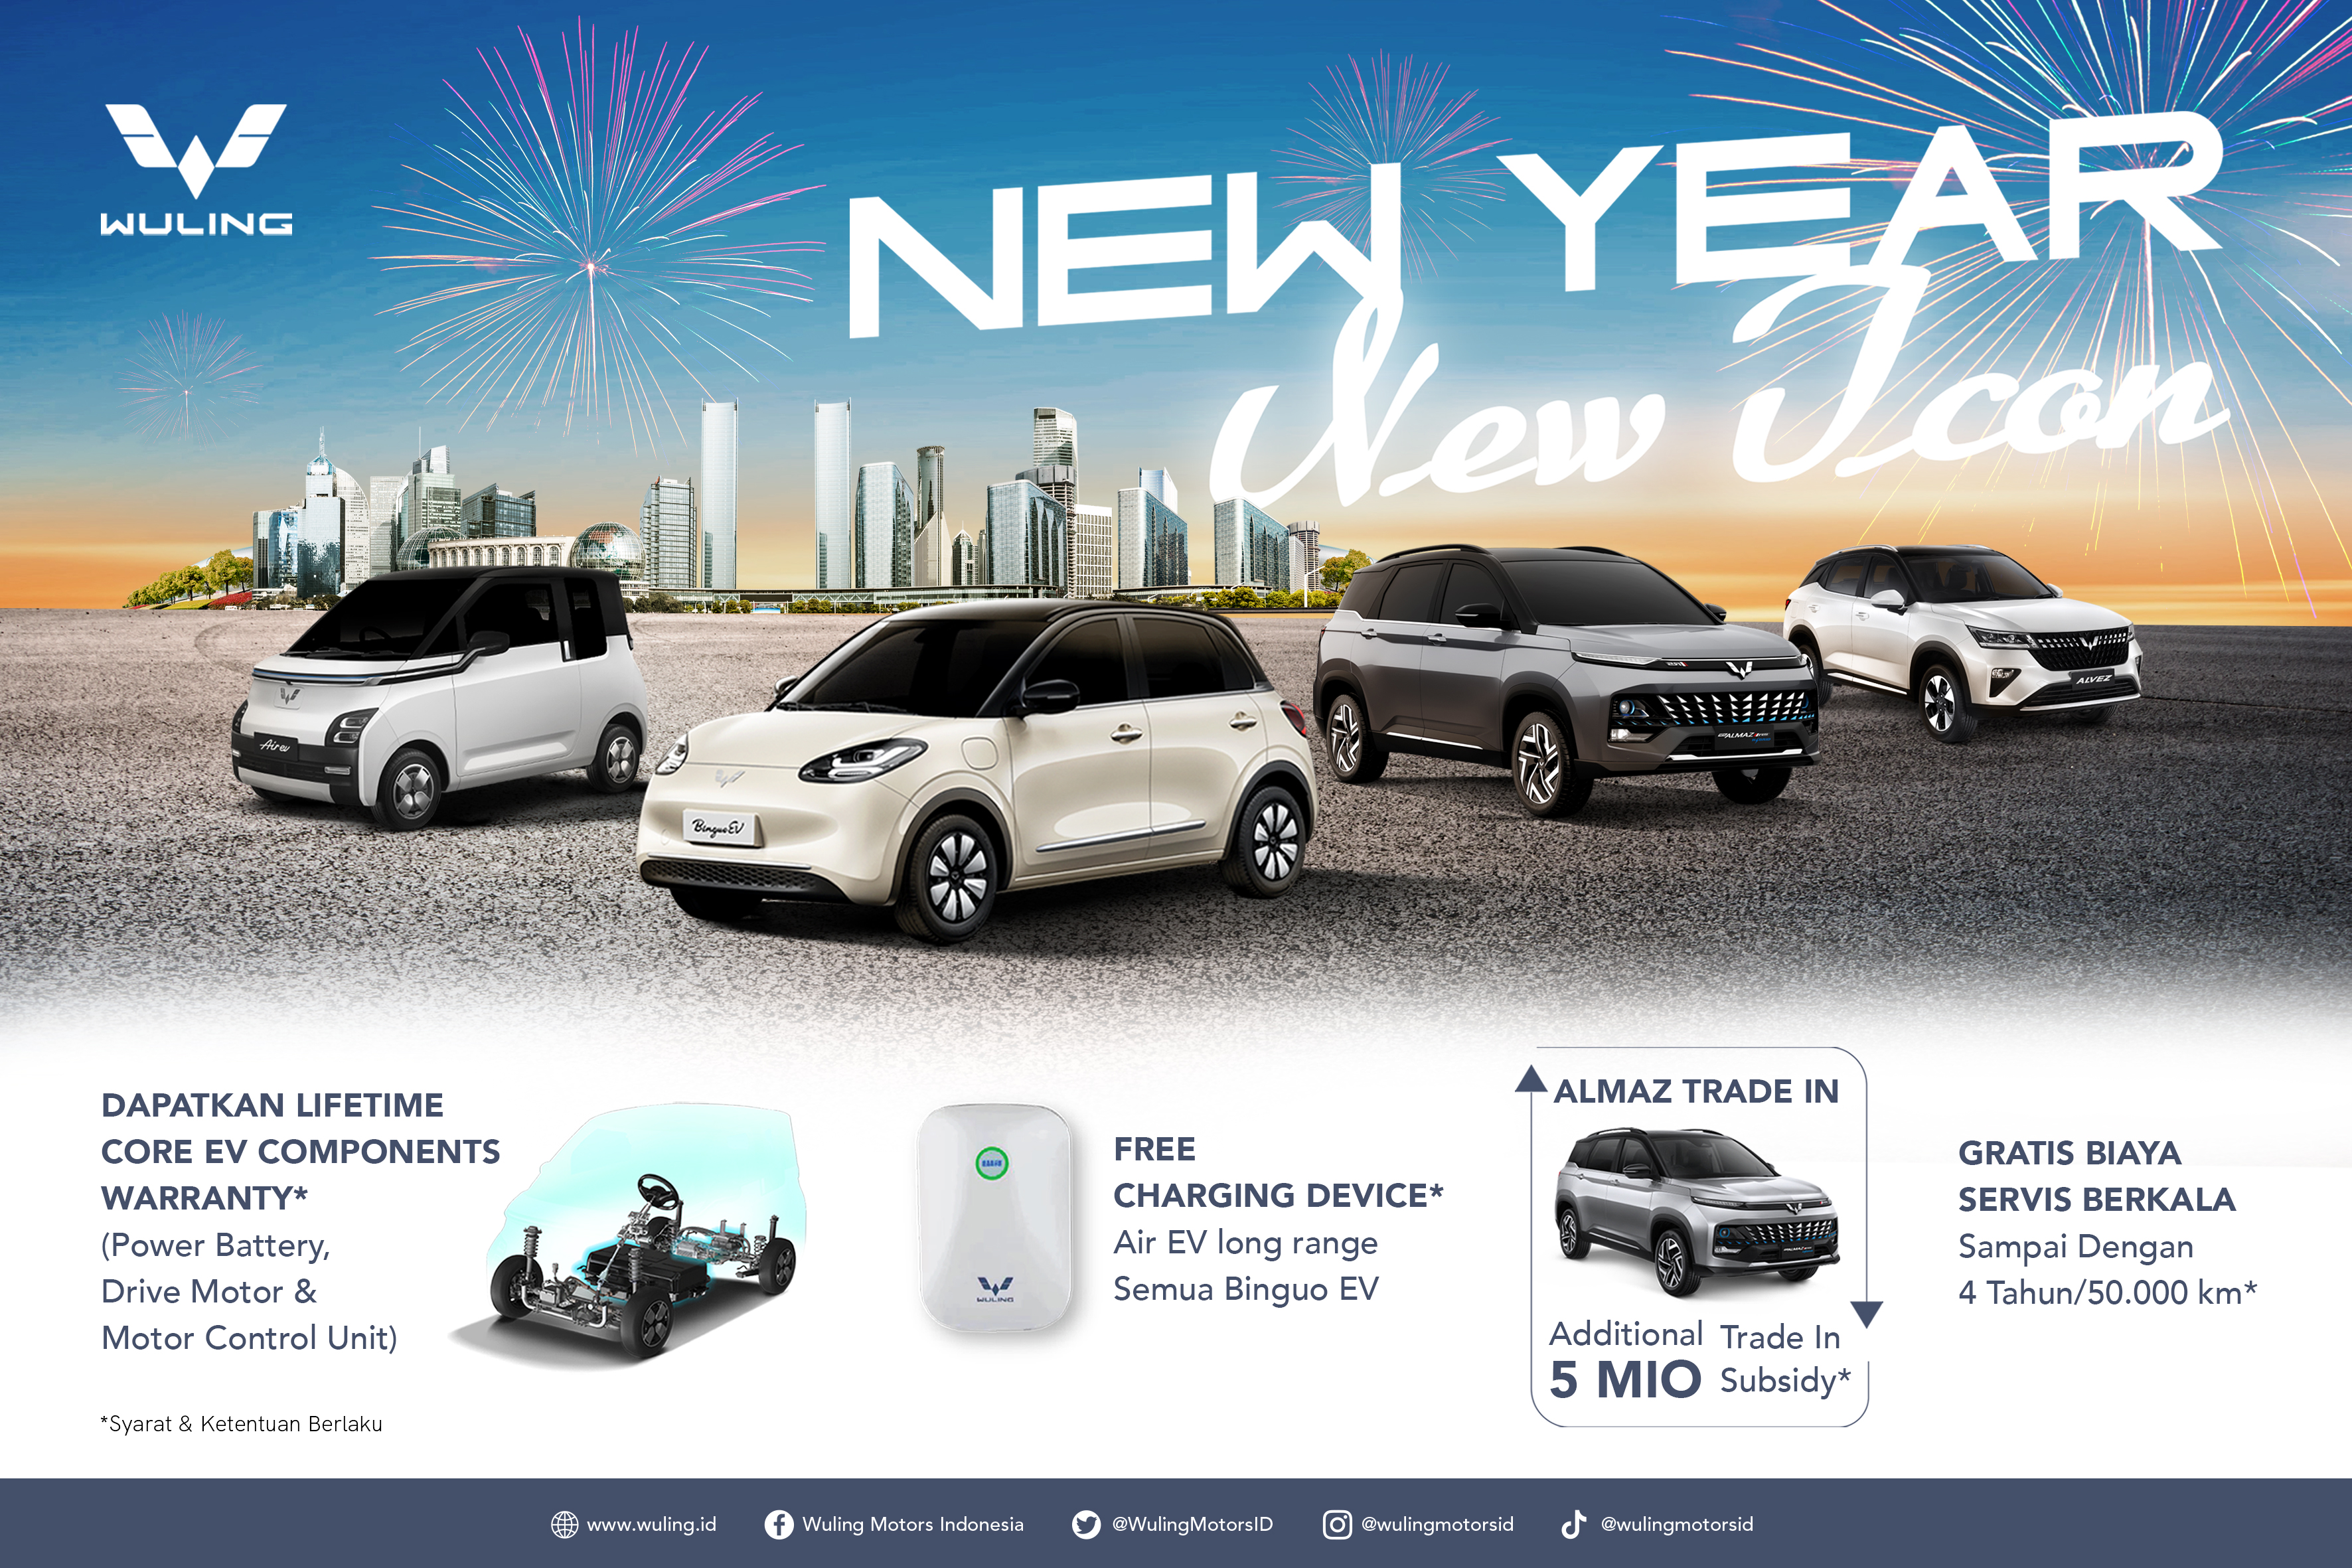 Image Wuling Welcomes New Year with Promo Program Titled ‘New Year, New Icon’